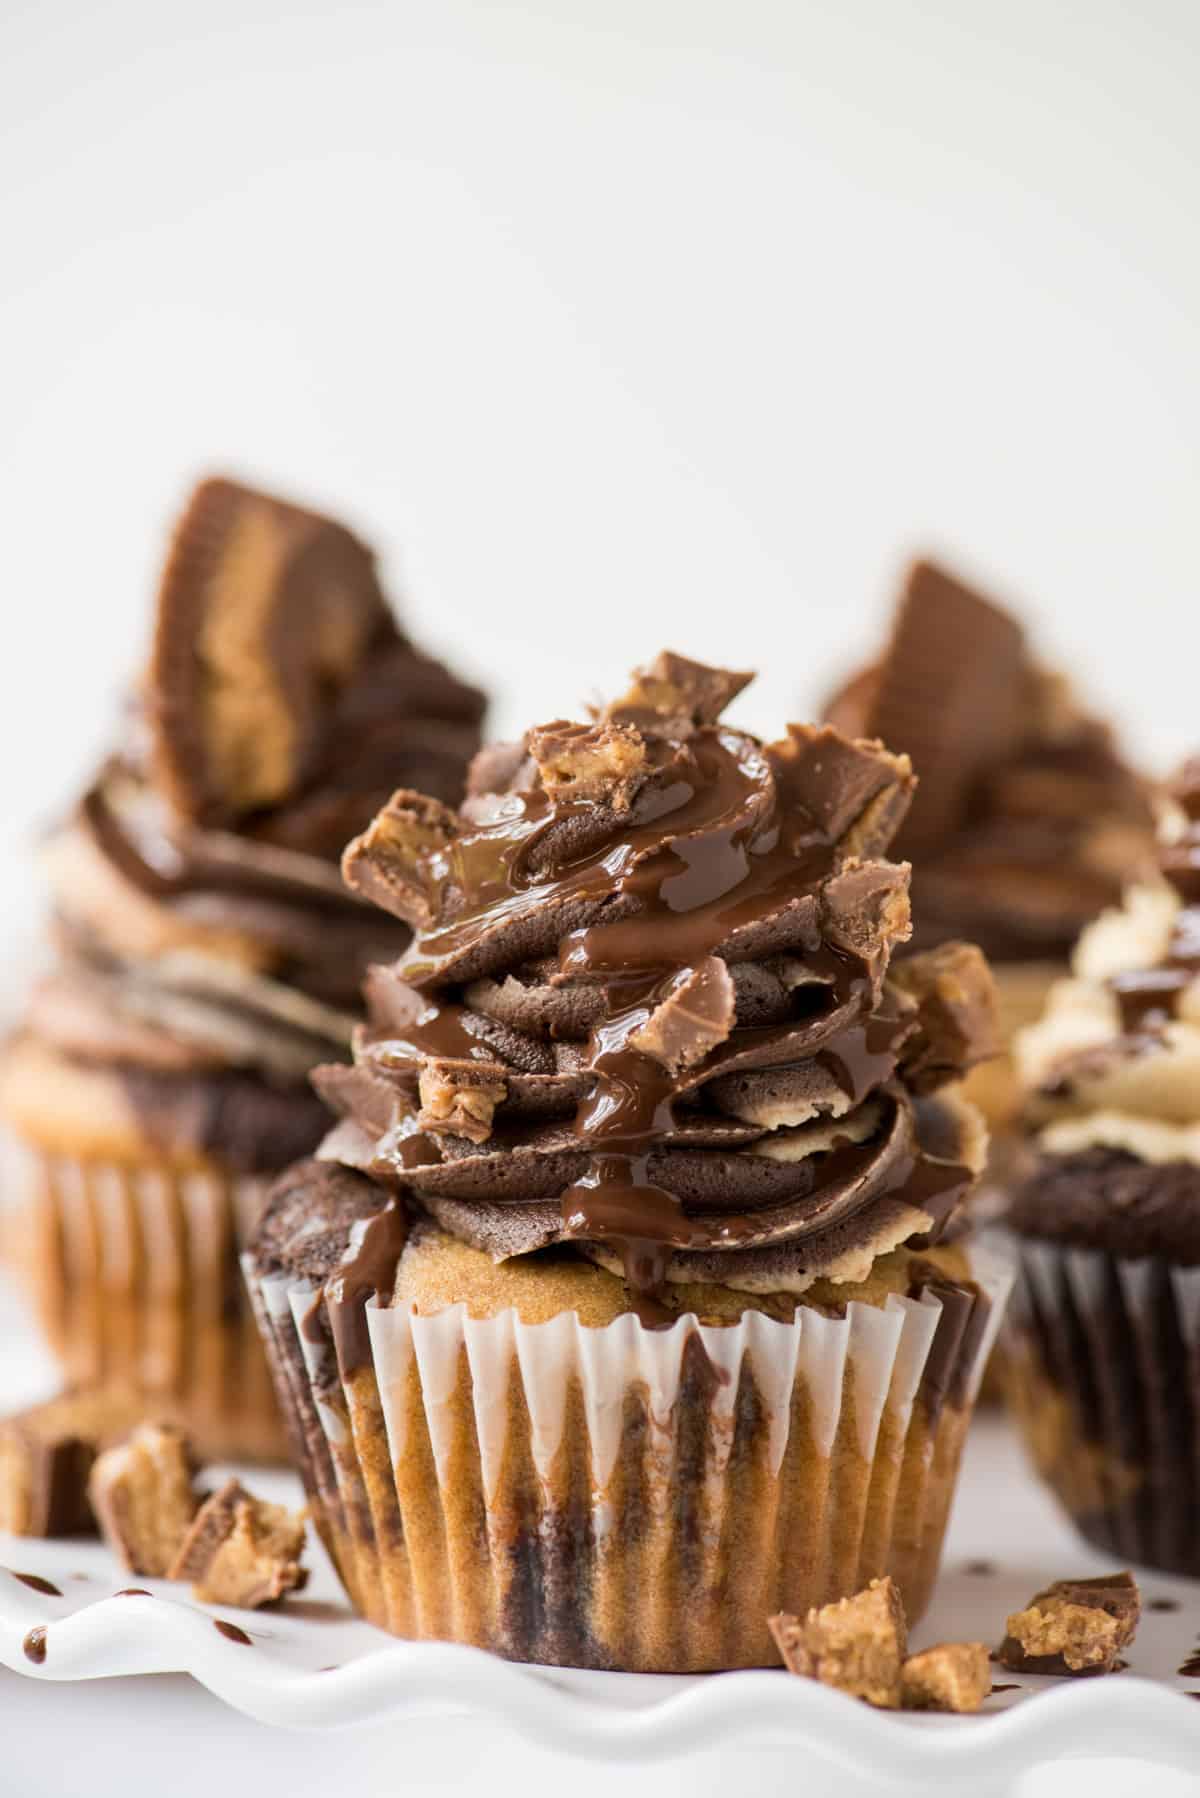 Reese's cupcakes with chocolate and peanut butter swirl frosting.